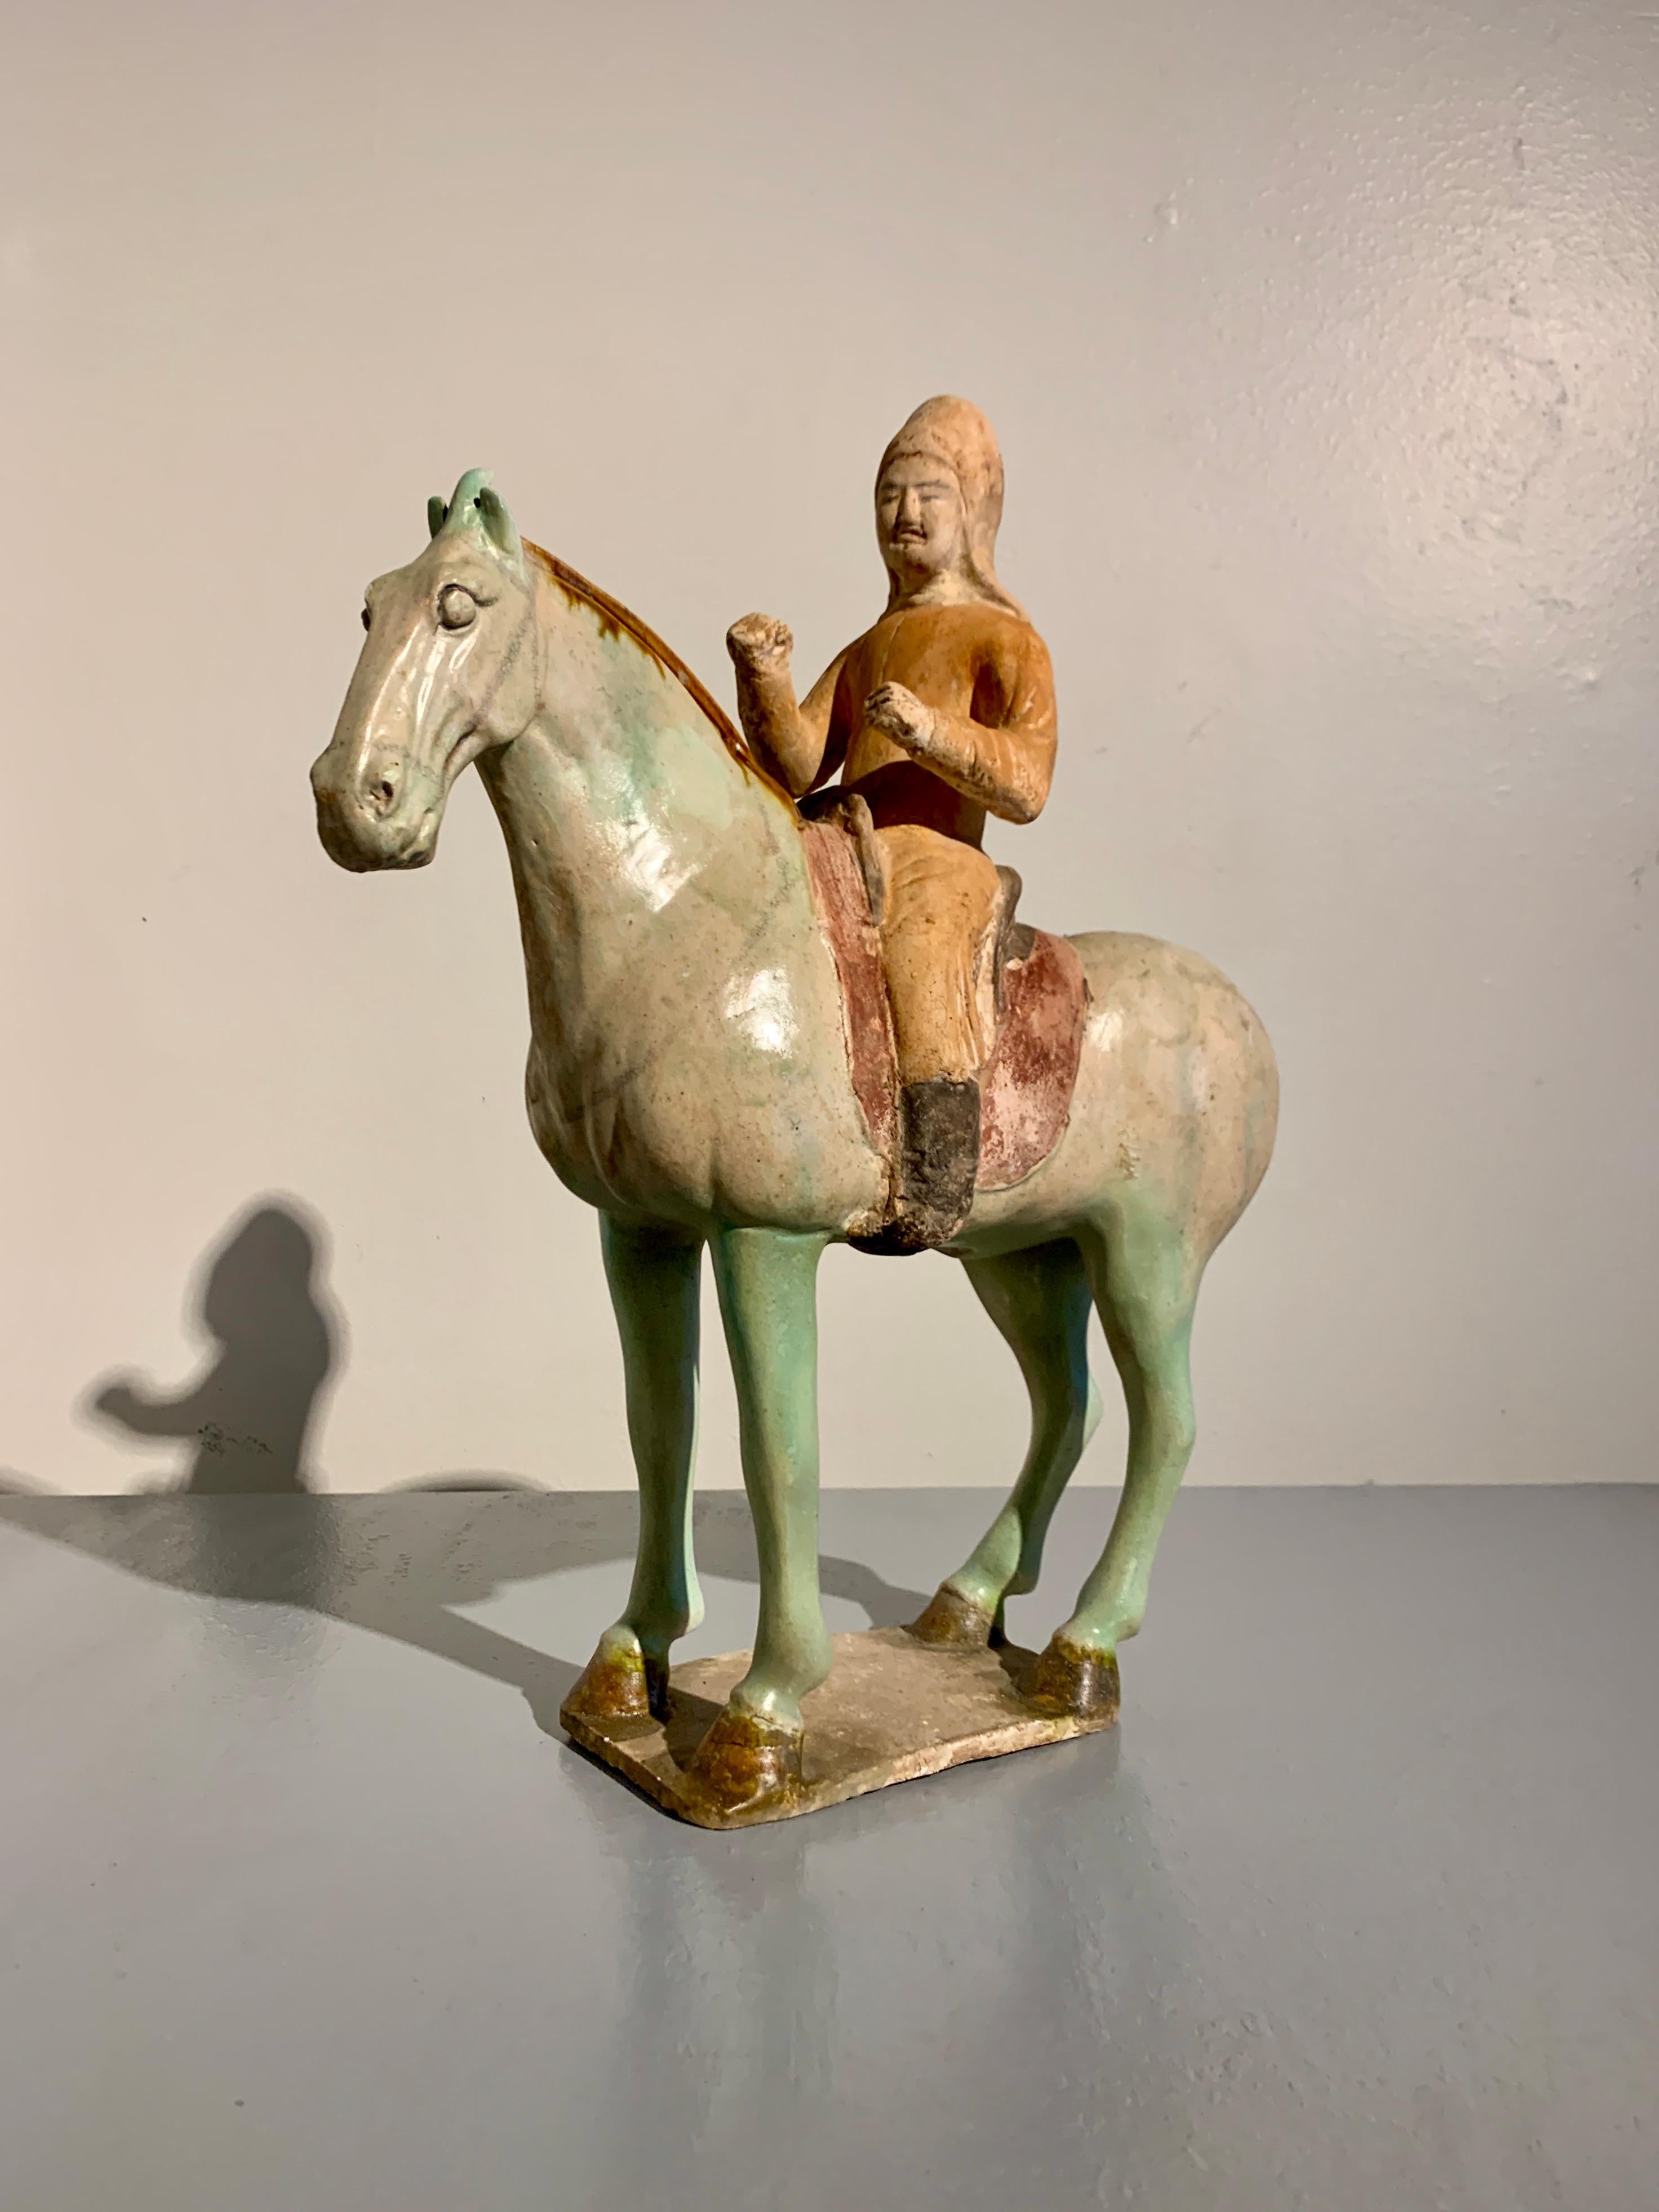 A fine and unusual Chinese Tang Sancai glazed model of a horse and rider, Tang Dynasty (618 to 906 CE), early 8th century, China.

This fantastic sculpture portrays a male figures seated in a saddle upon the back of a noble horse. 

The figure is a